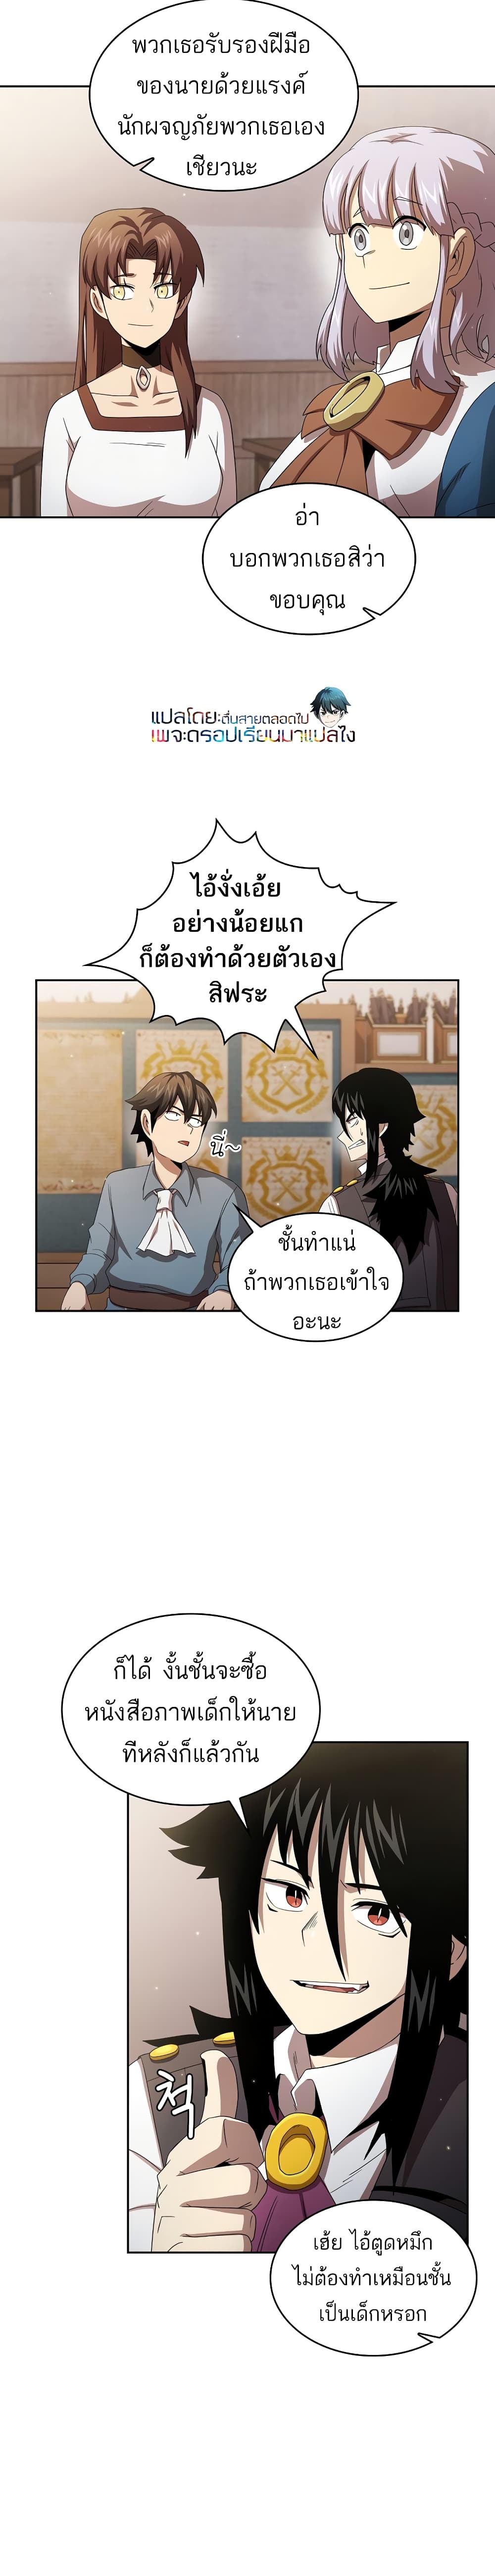 Is This Hero for Real à¸à¸­à¸à¸à¸µà¹ 31 (23)